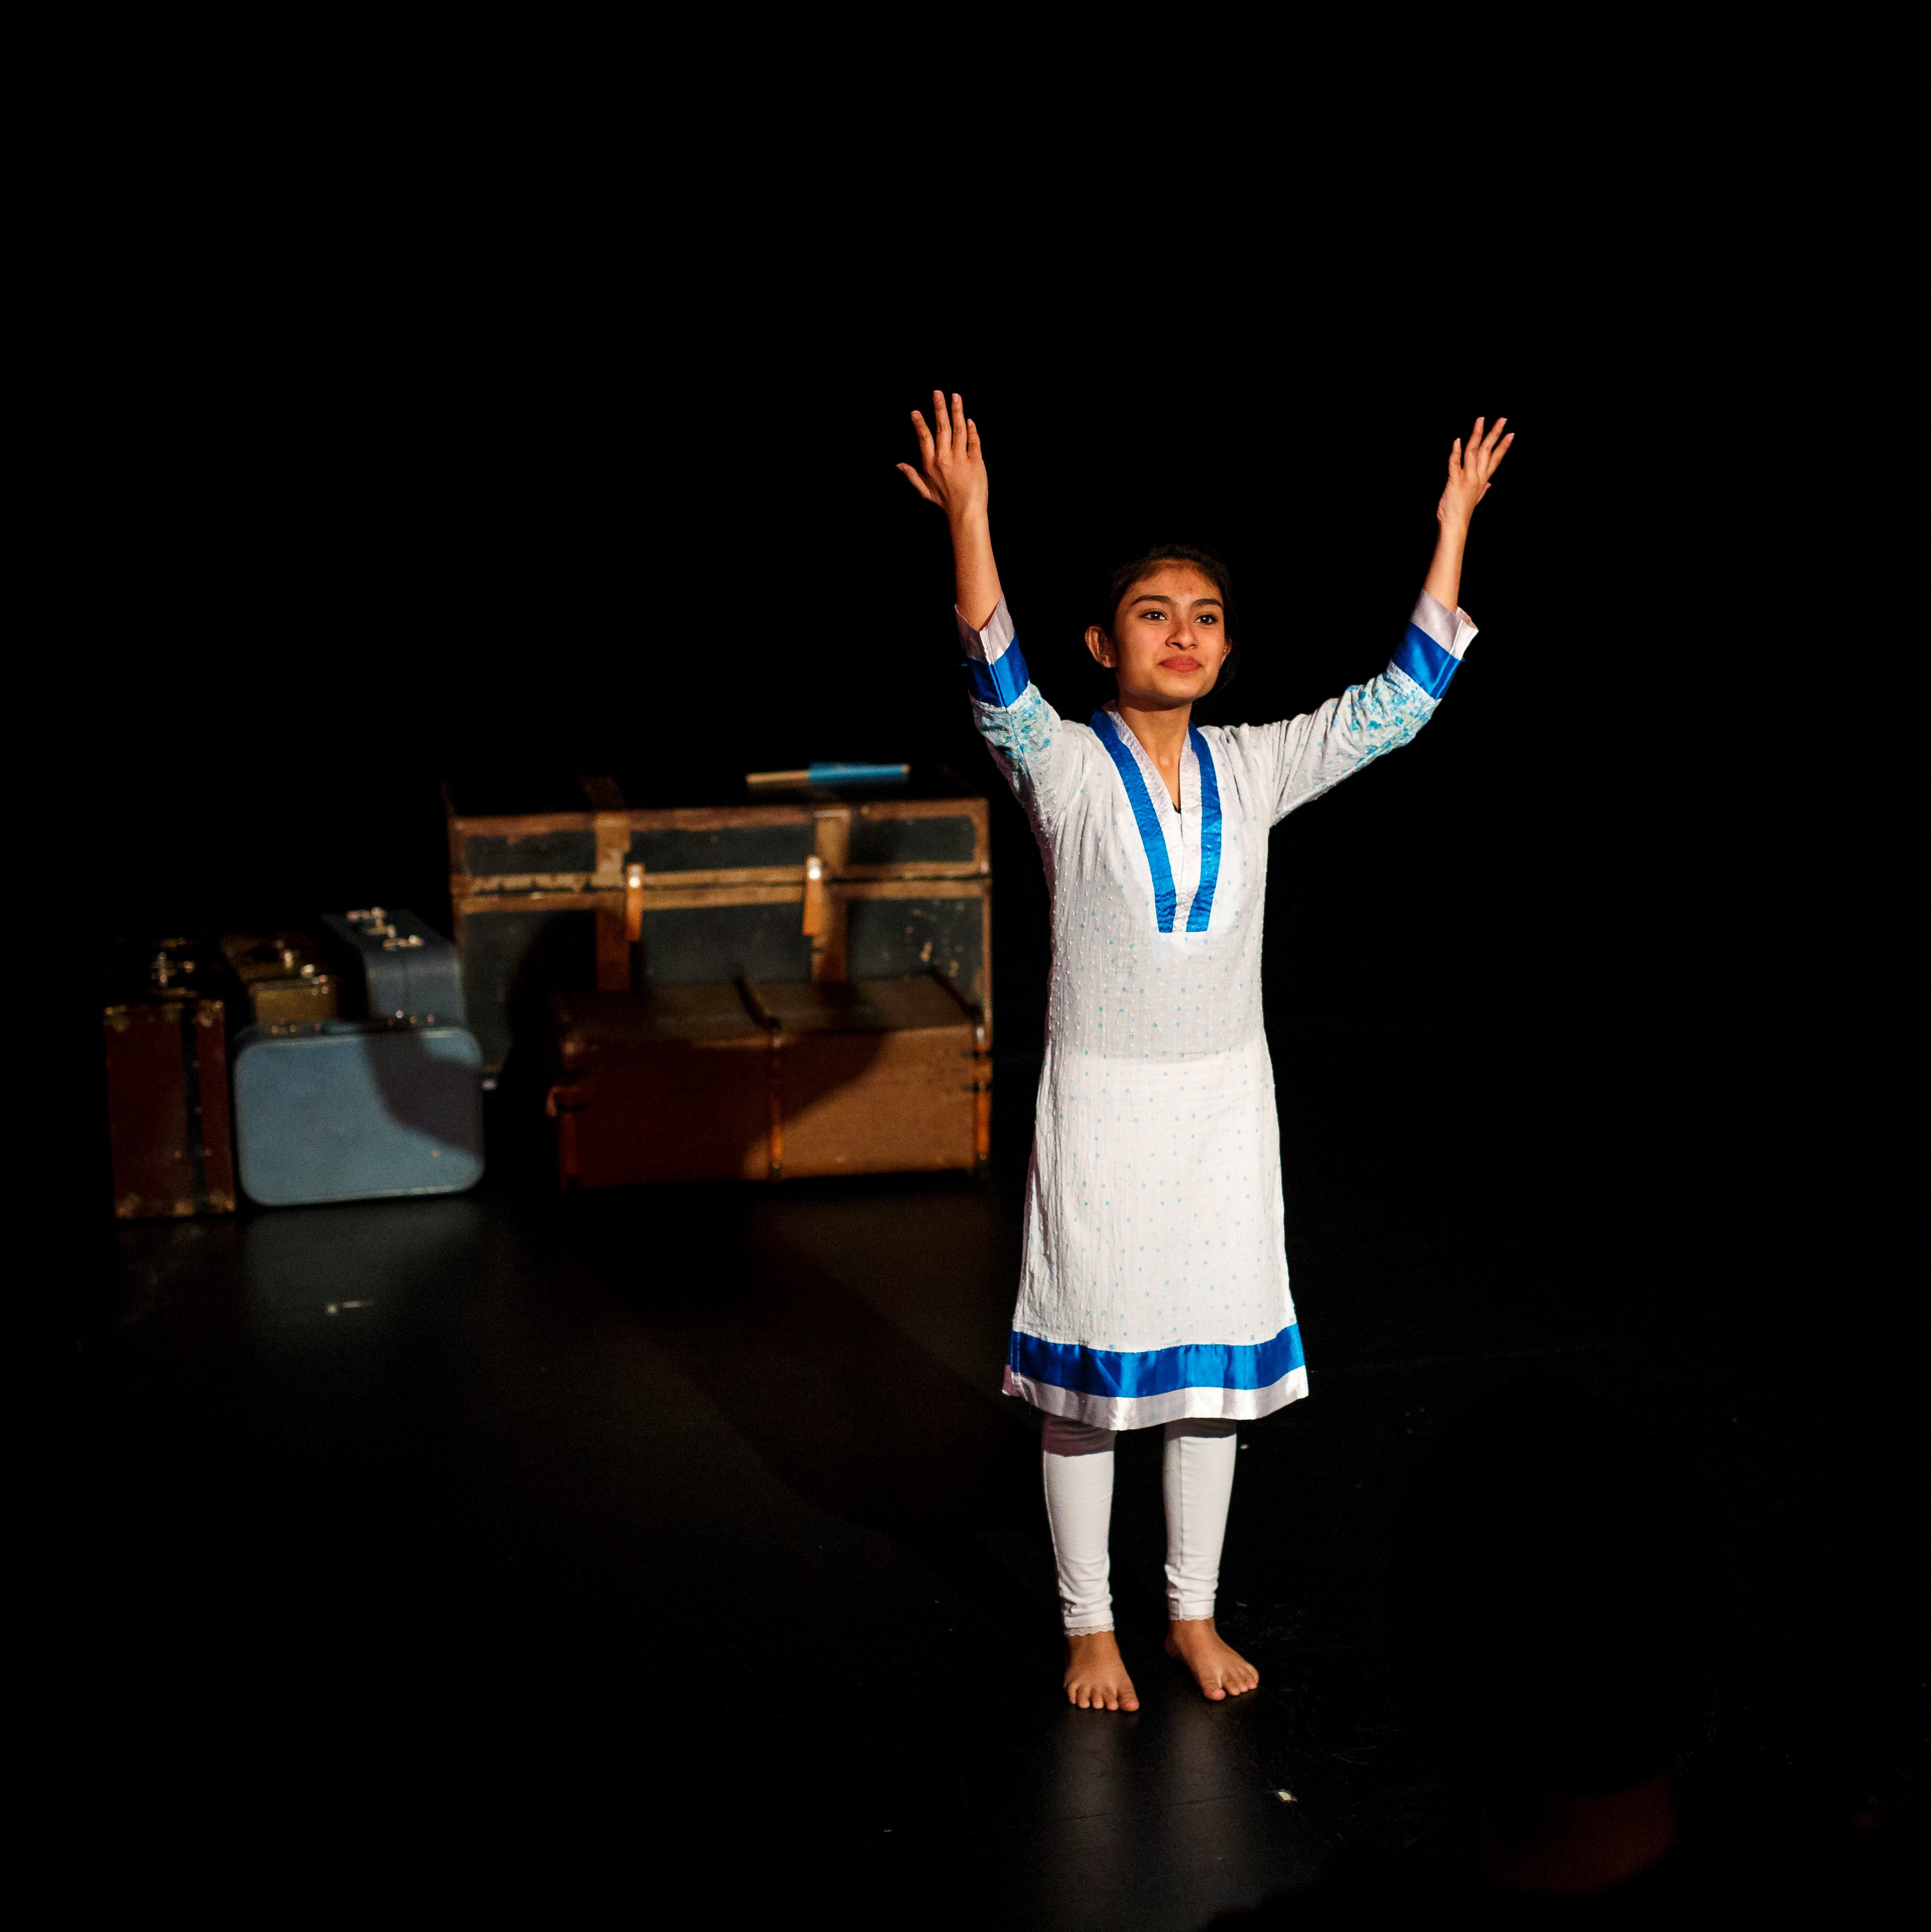 Fatima Nafisa - Young woman on a stage wearing a white traditional Indian wear with white trim. He hands are outstretched